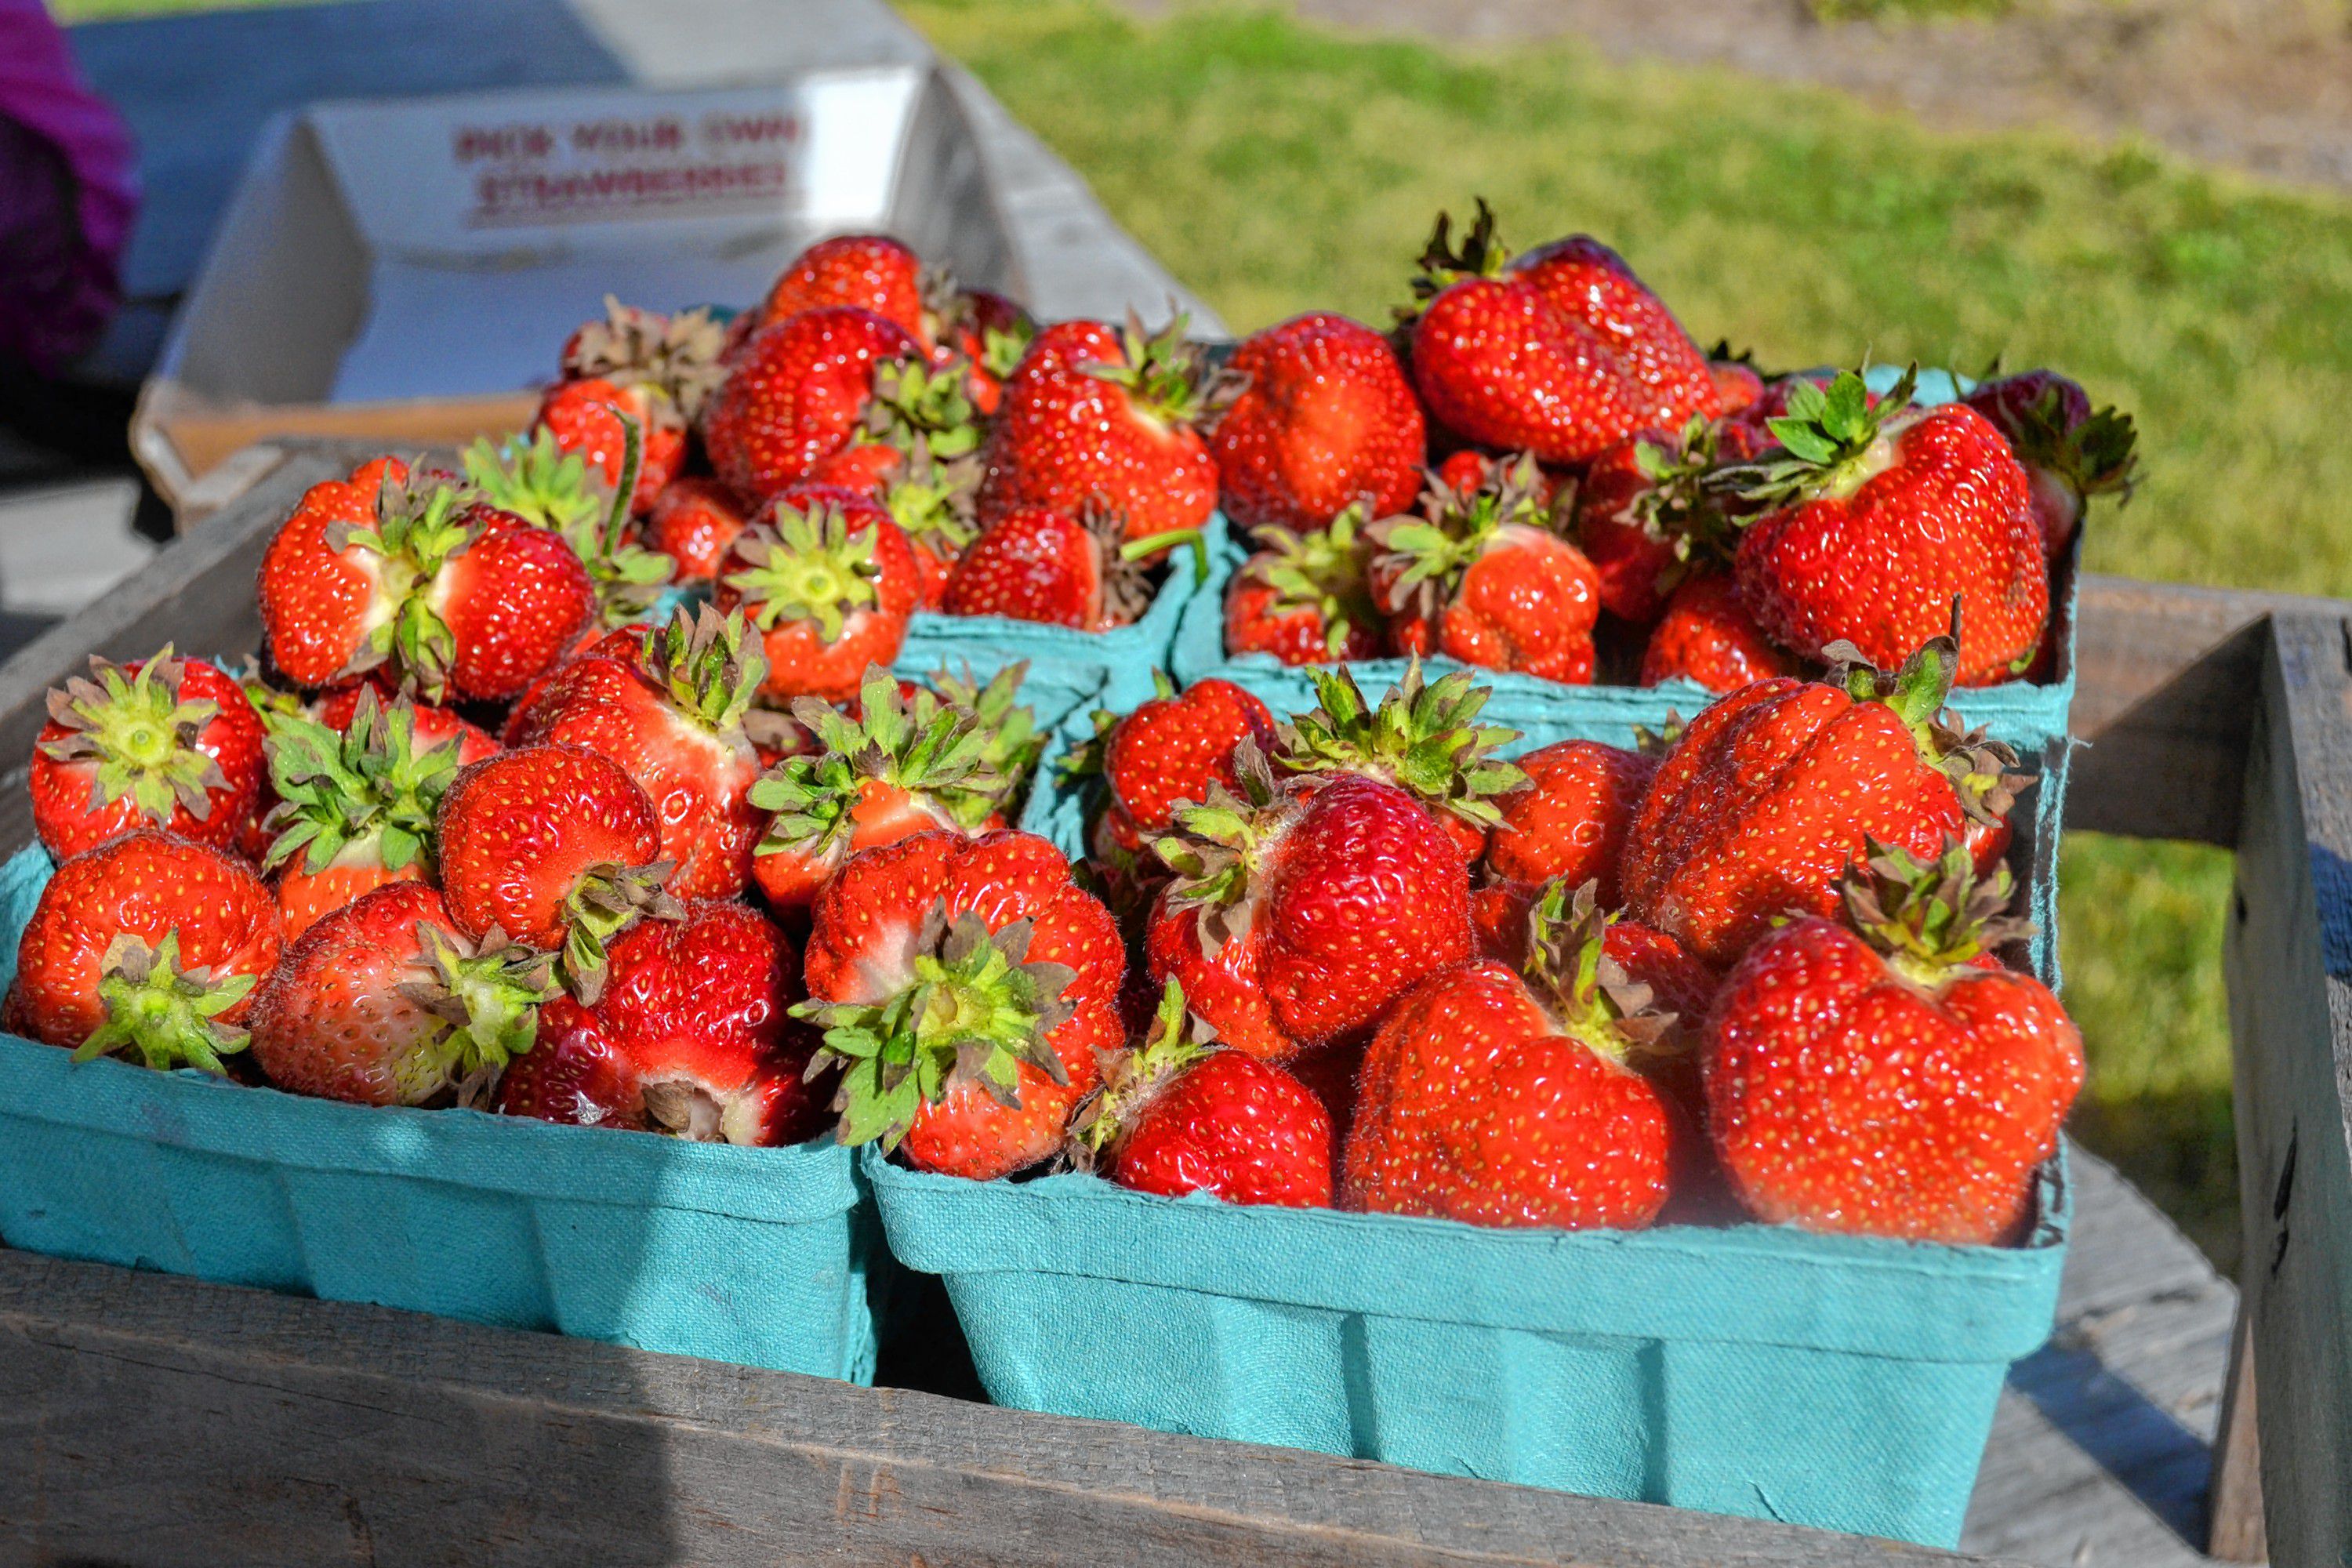 Get your strawberry fix at Bow Mills festival The Concord Insider